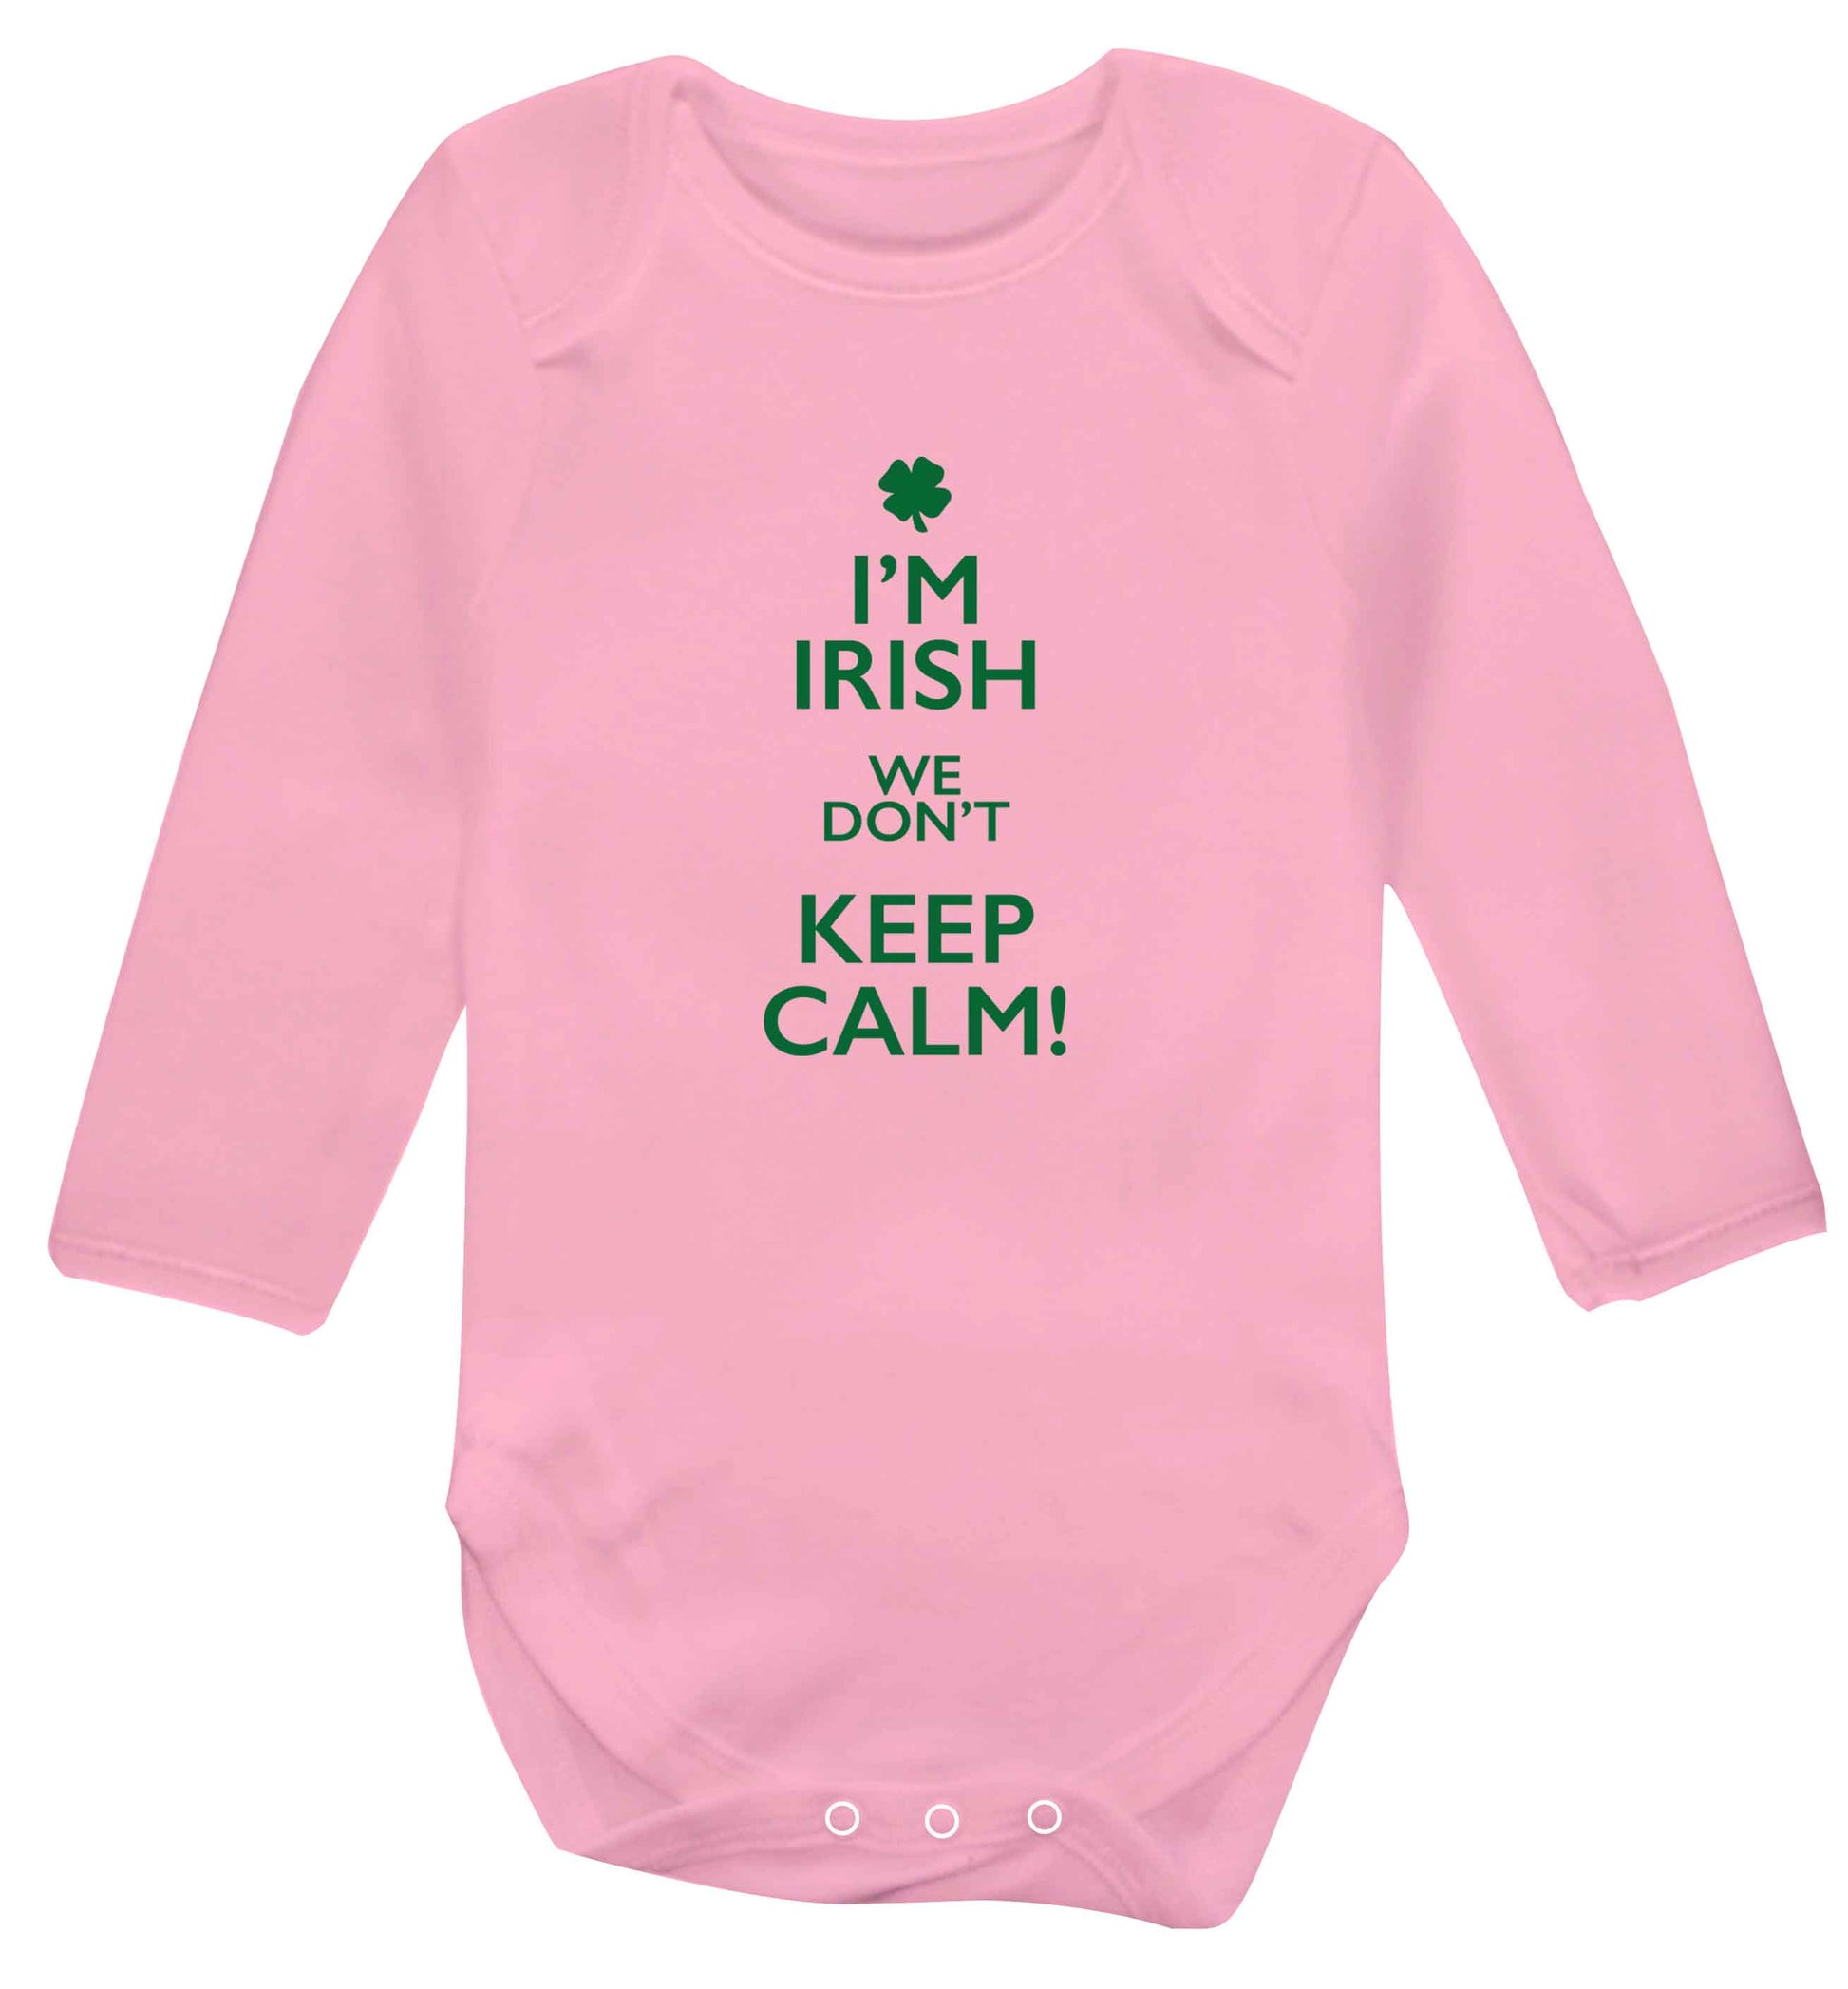 I'm Irish we don't keep calm baby vest long sleeved pale pink 6-12 months